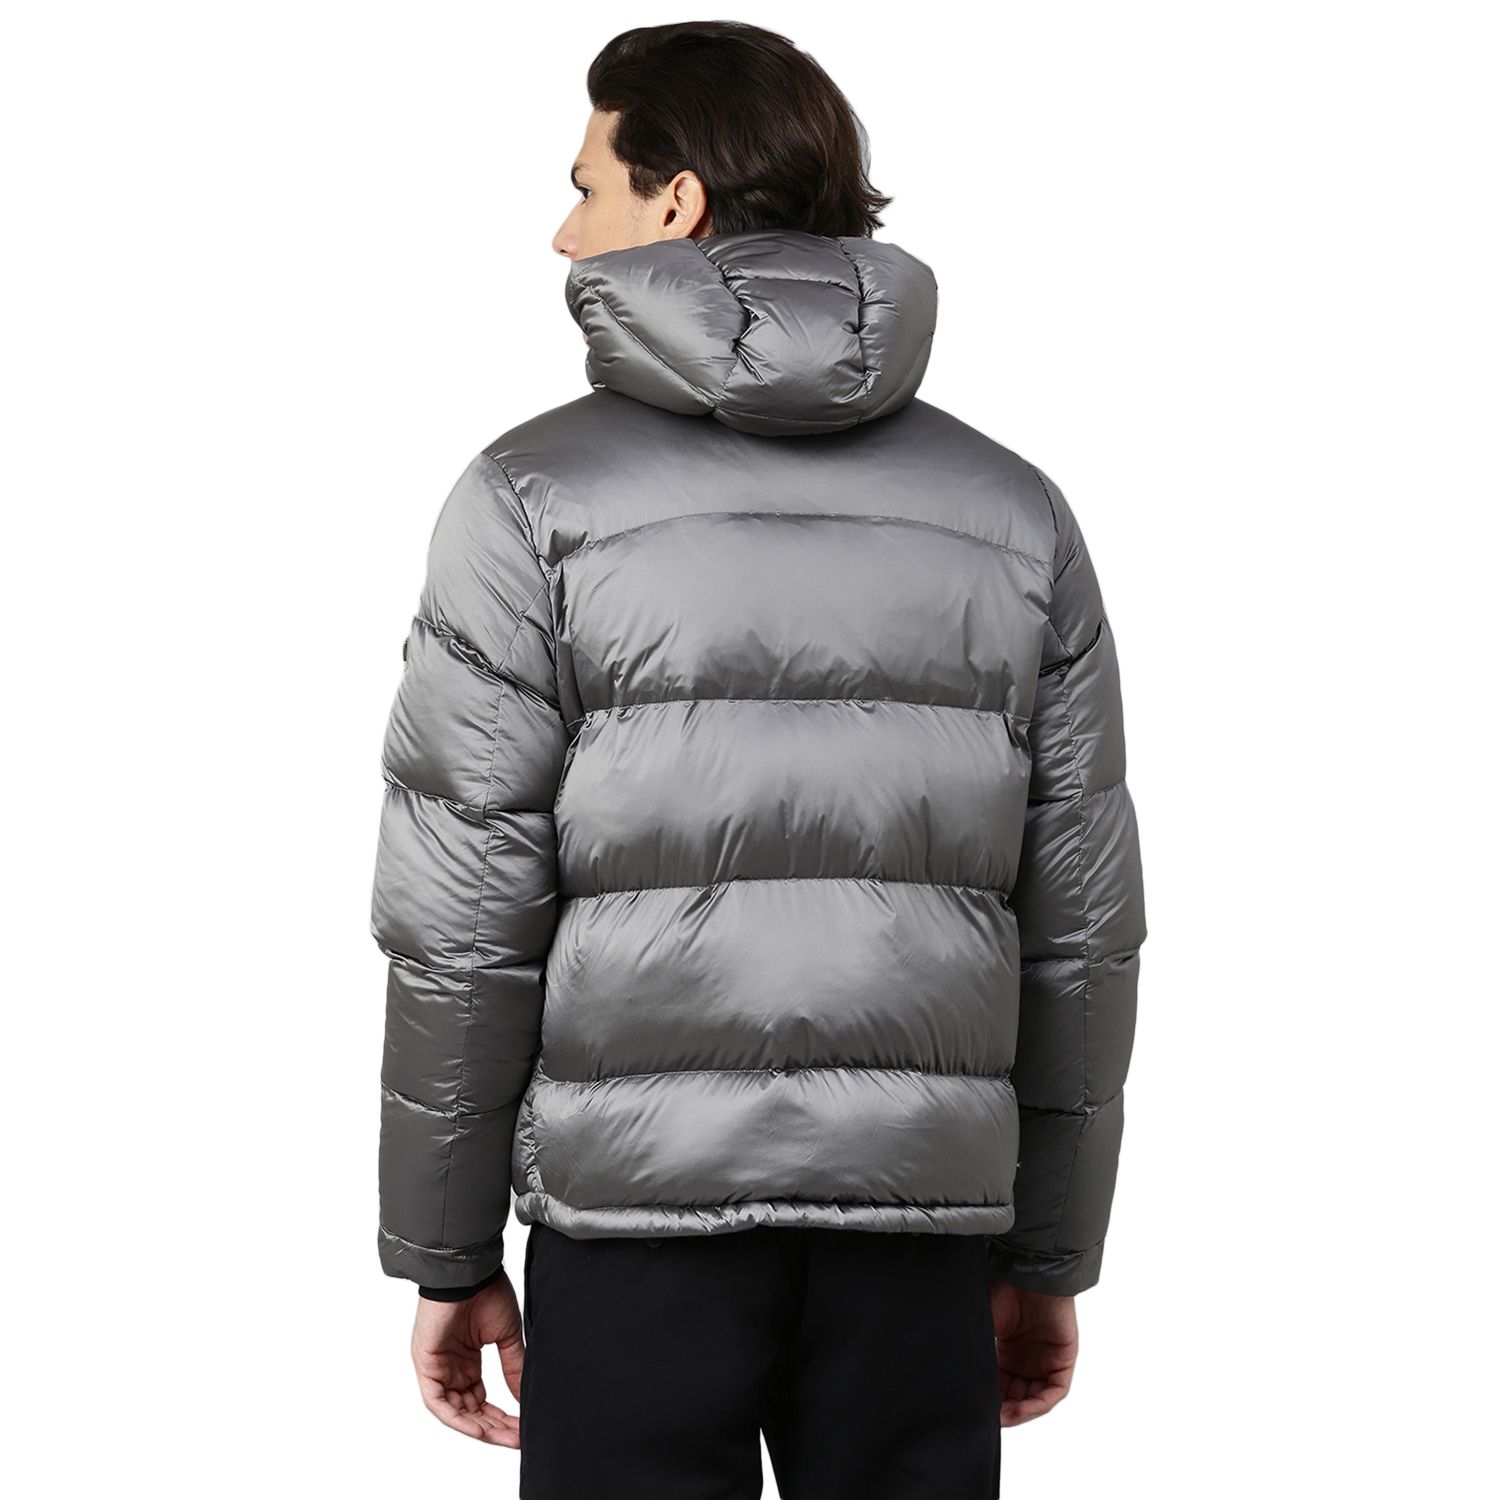 Charcoal grey down jacket for men